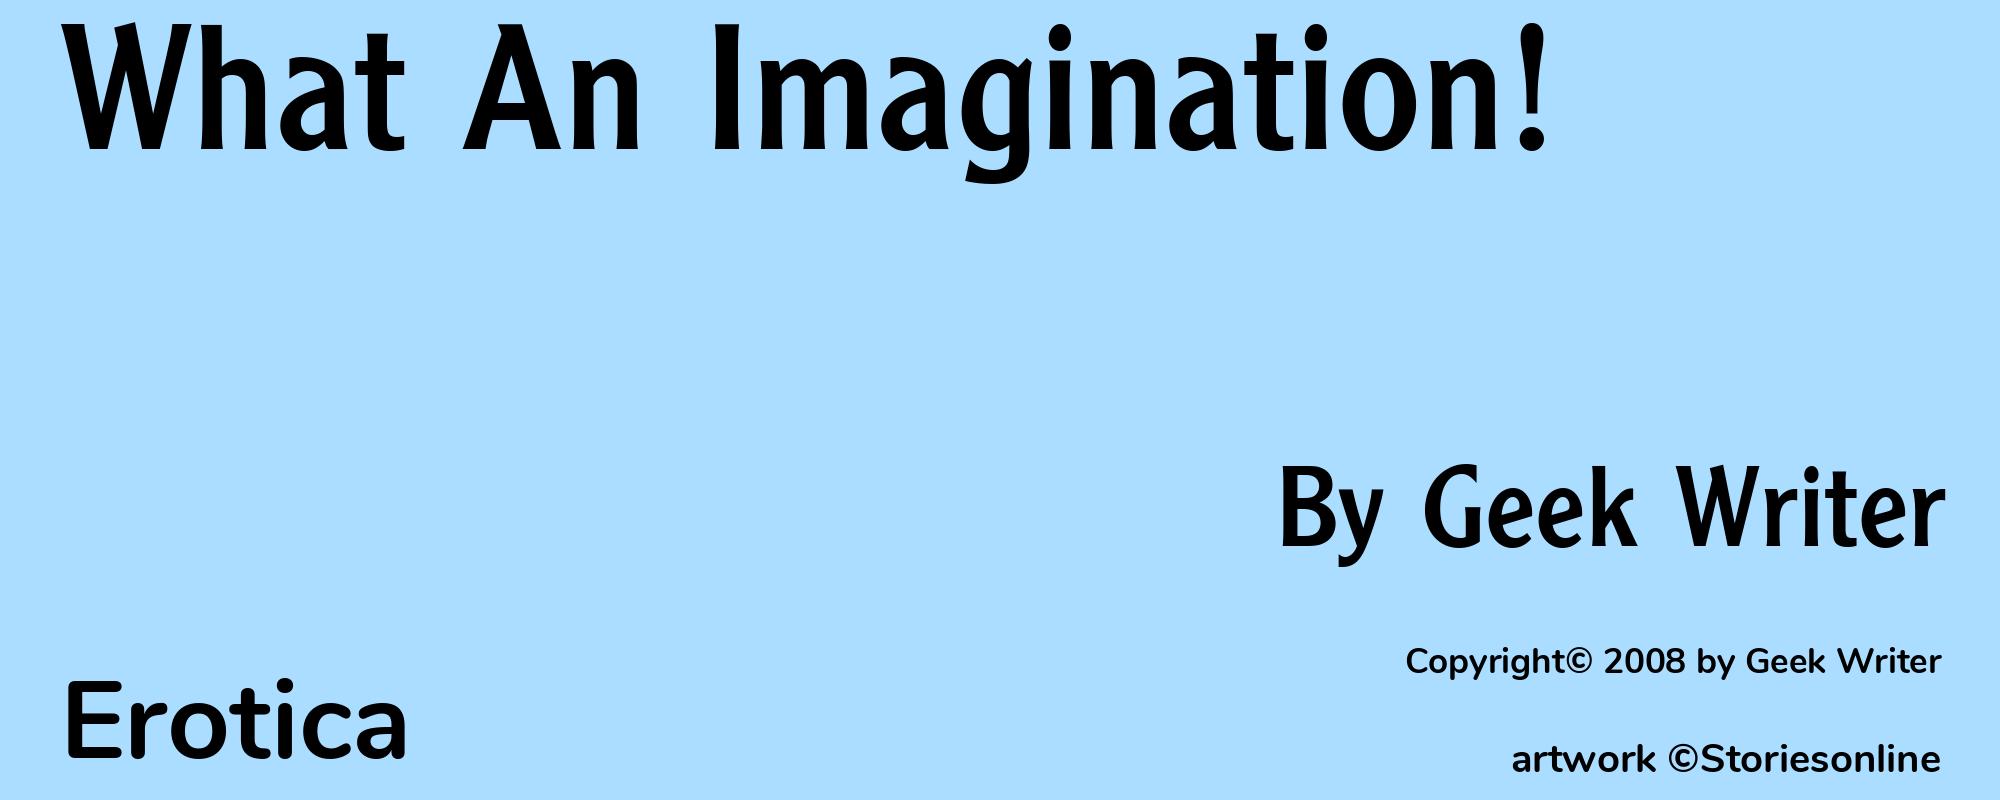 What An Imagination! - Cover